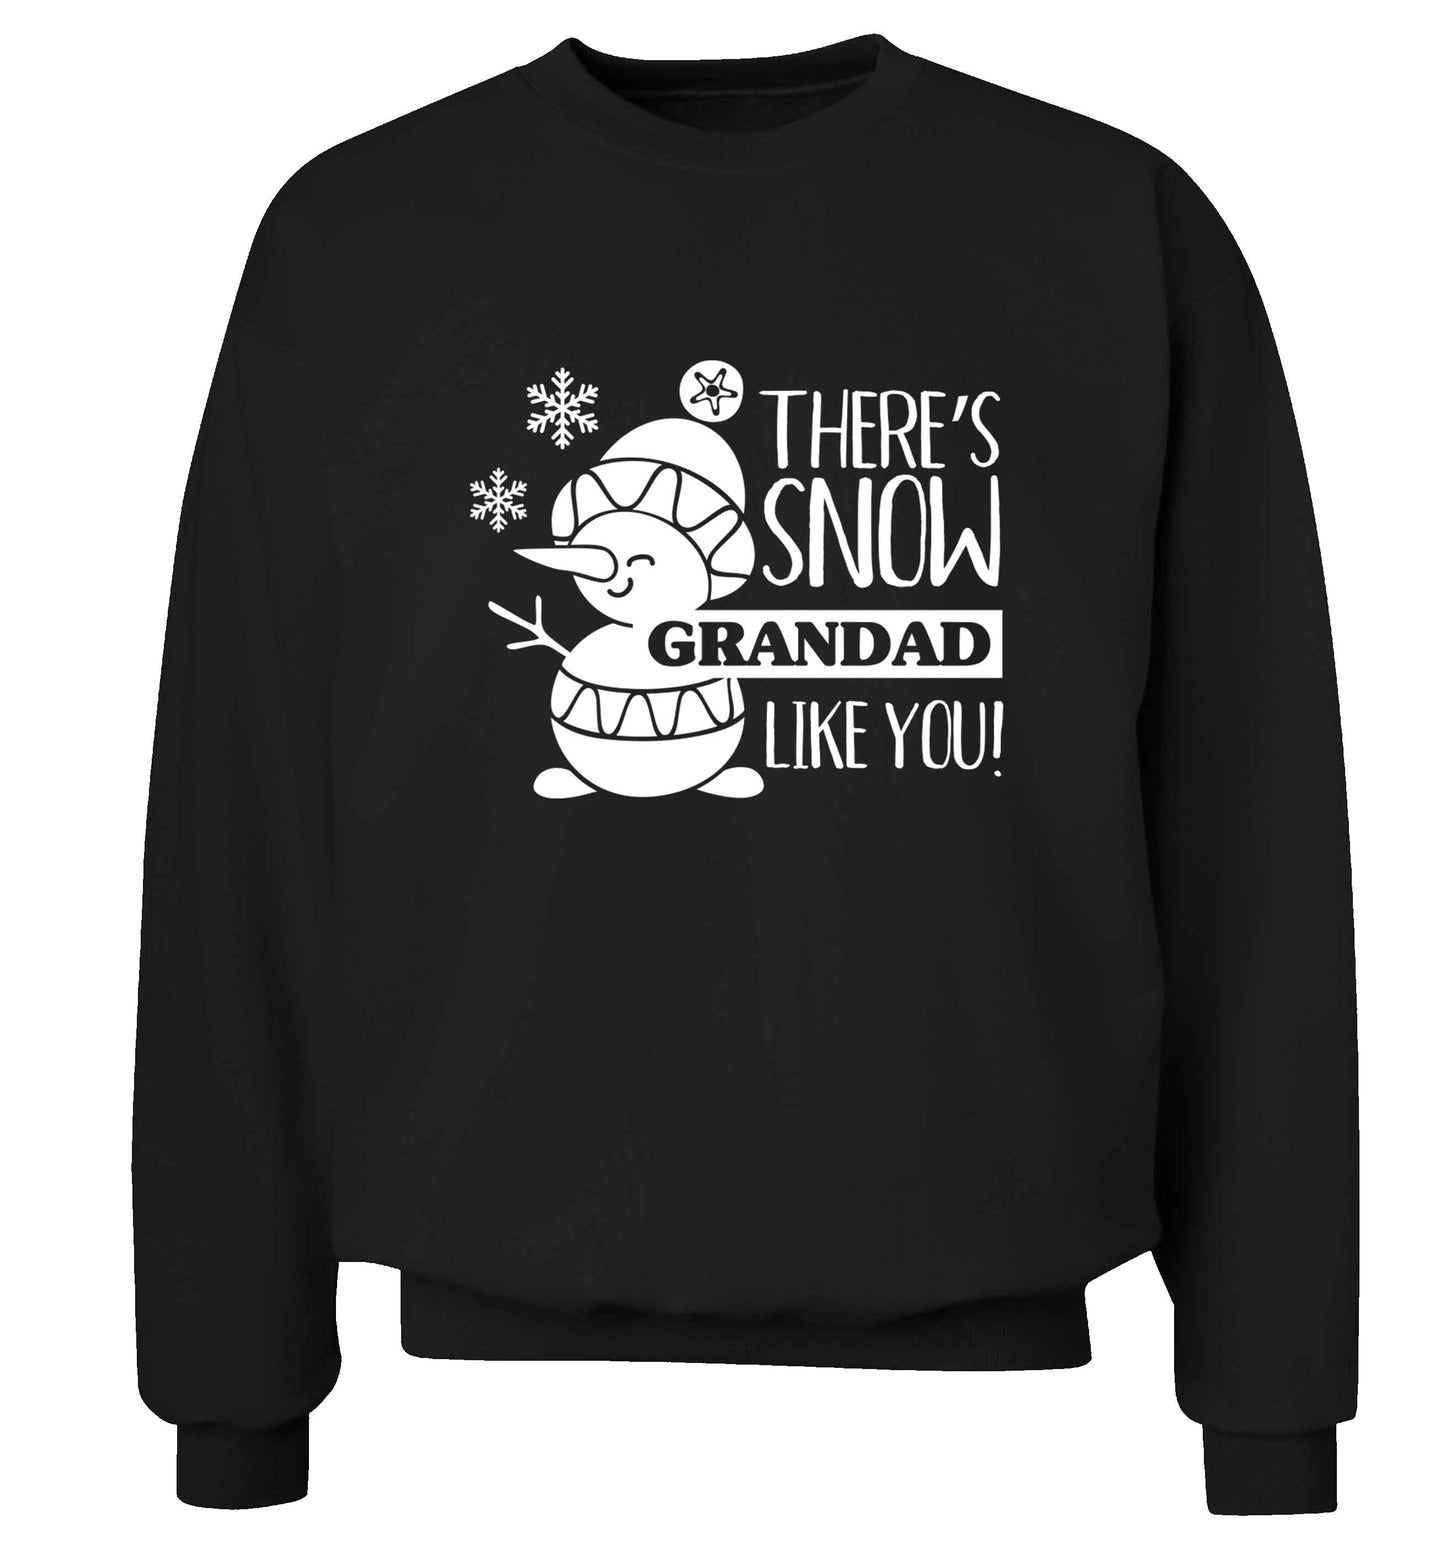 There's snow grandad like you adult's unisex black sweater 2XL